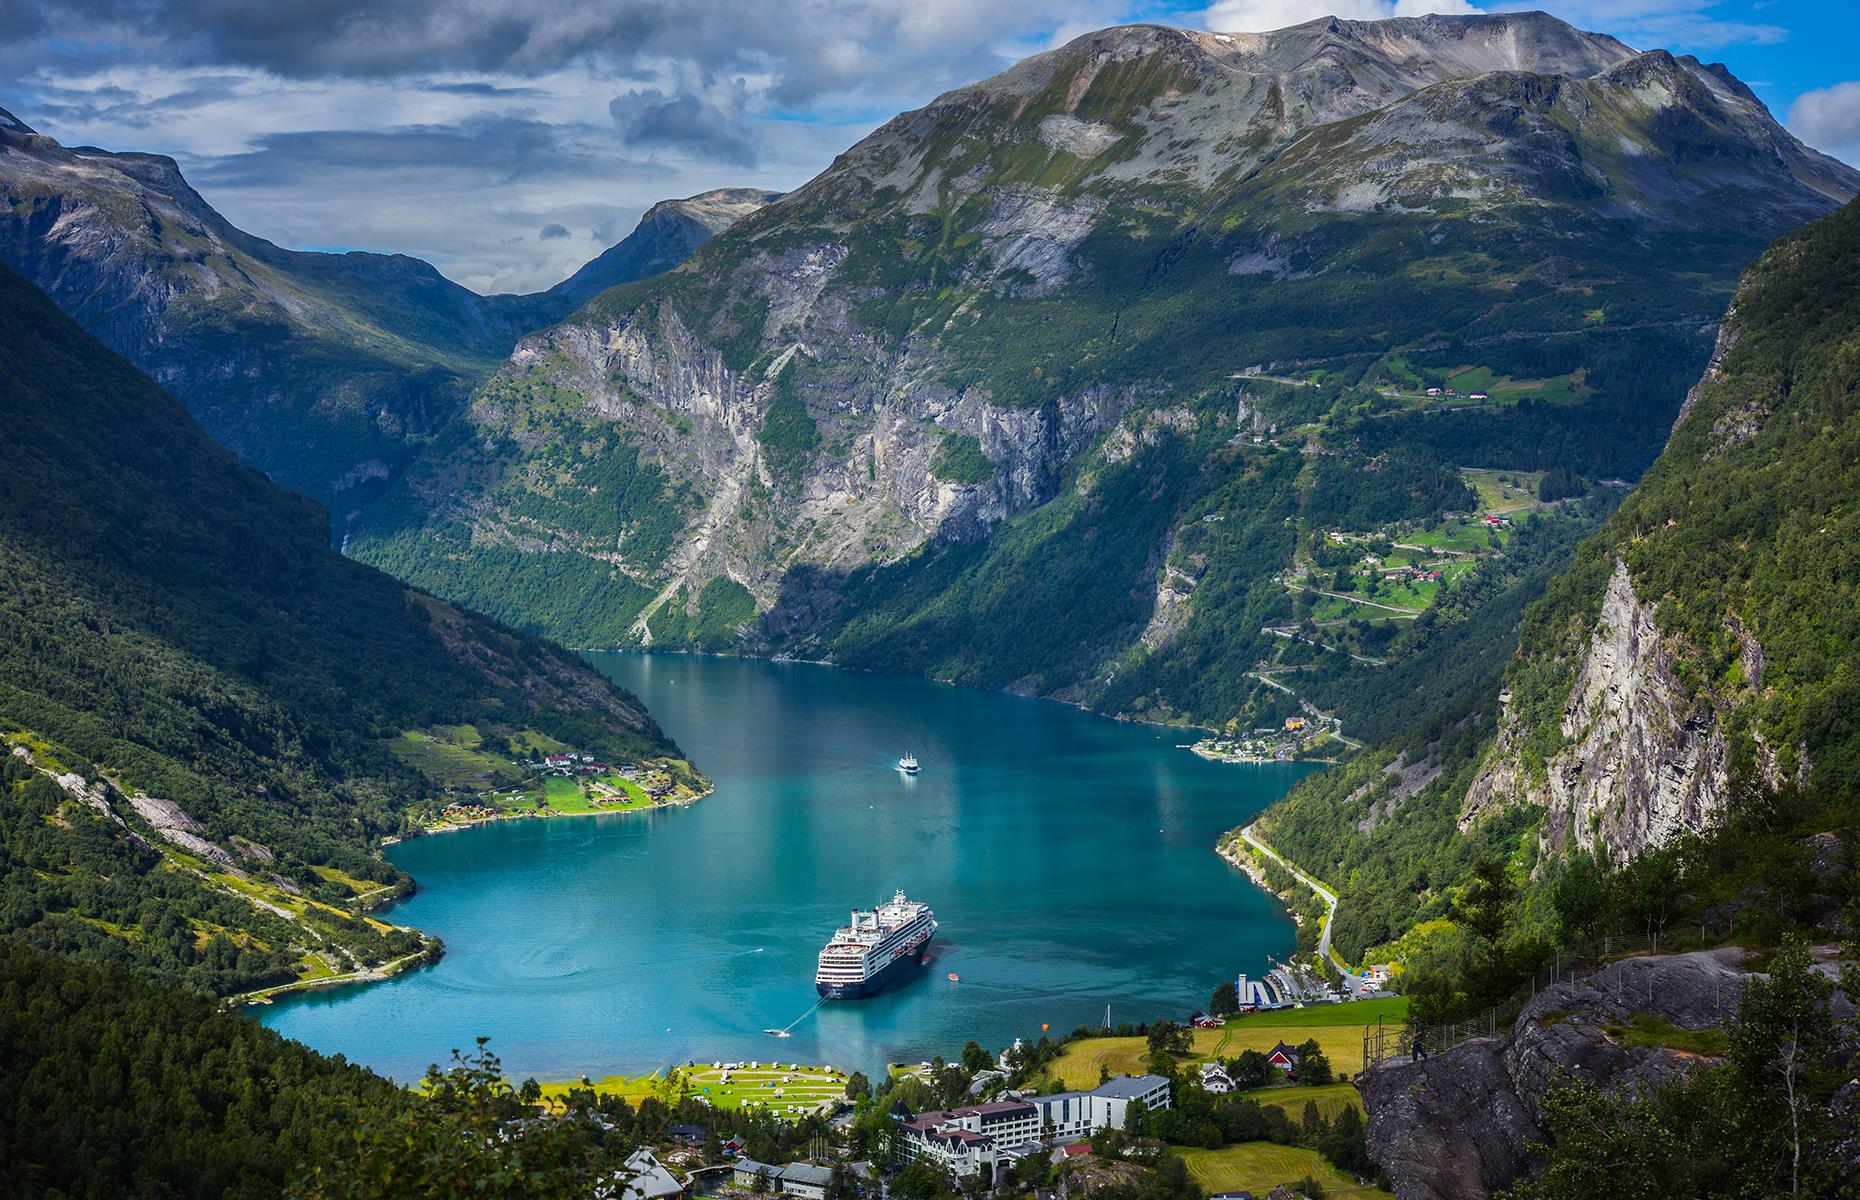 <p>Rumored to have inspired the Disney animated film <em>Frozen</em>’s kingdom of Arendelle, the staggeringly beautiful UNESCO World Heritage Site of Geirangerfjord will inspire all ages. Children over five will love the 'Ranger Basecamp' program run by the visitor center, where they can learn about the glacial landscape and build their own fjord farmhouse (plus, there's a free book with every ticket). Adrenaline-seeking teenagers can kayak or fly across the ice-blue water on a zipwire.</p>